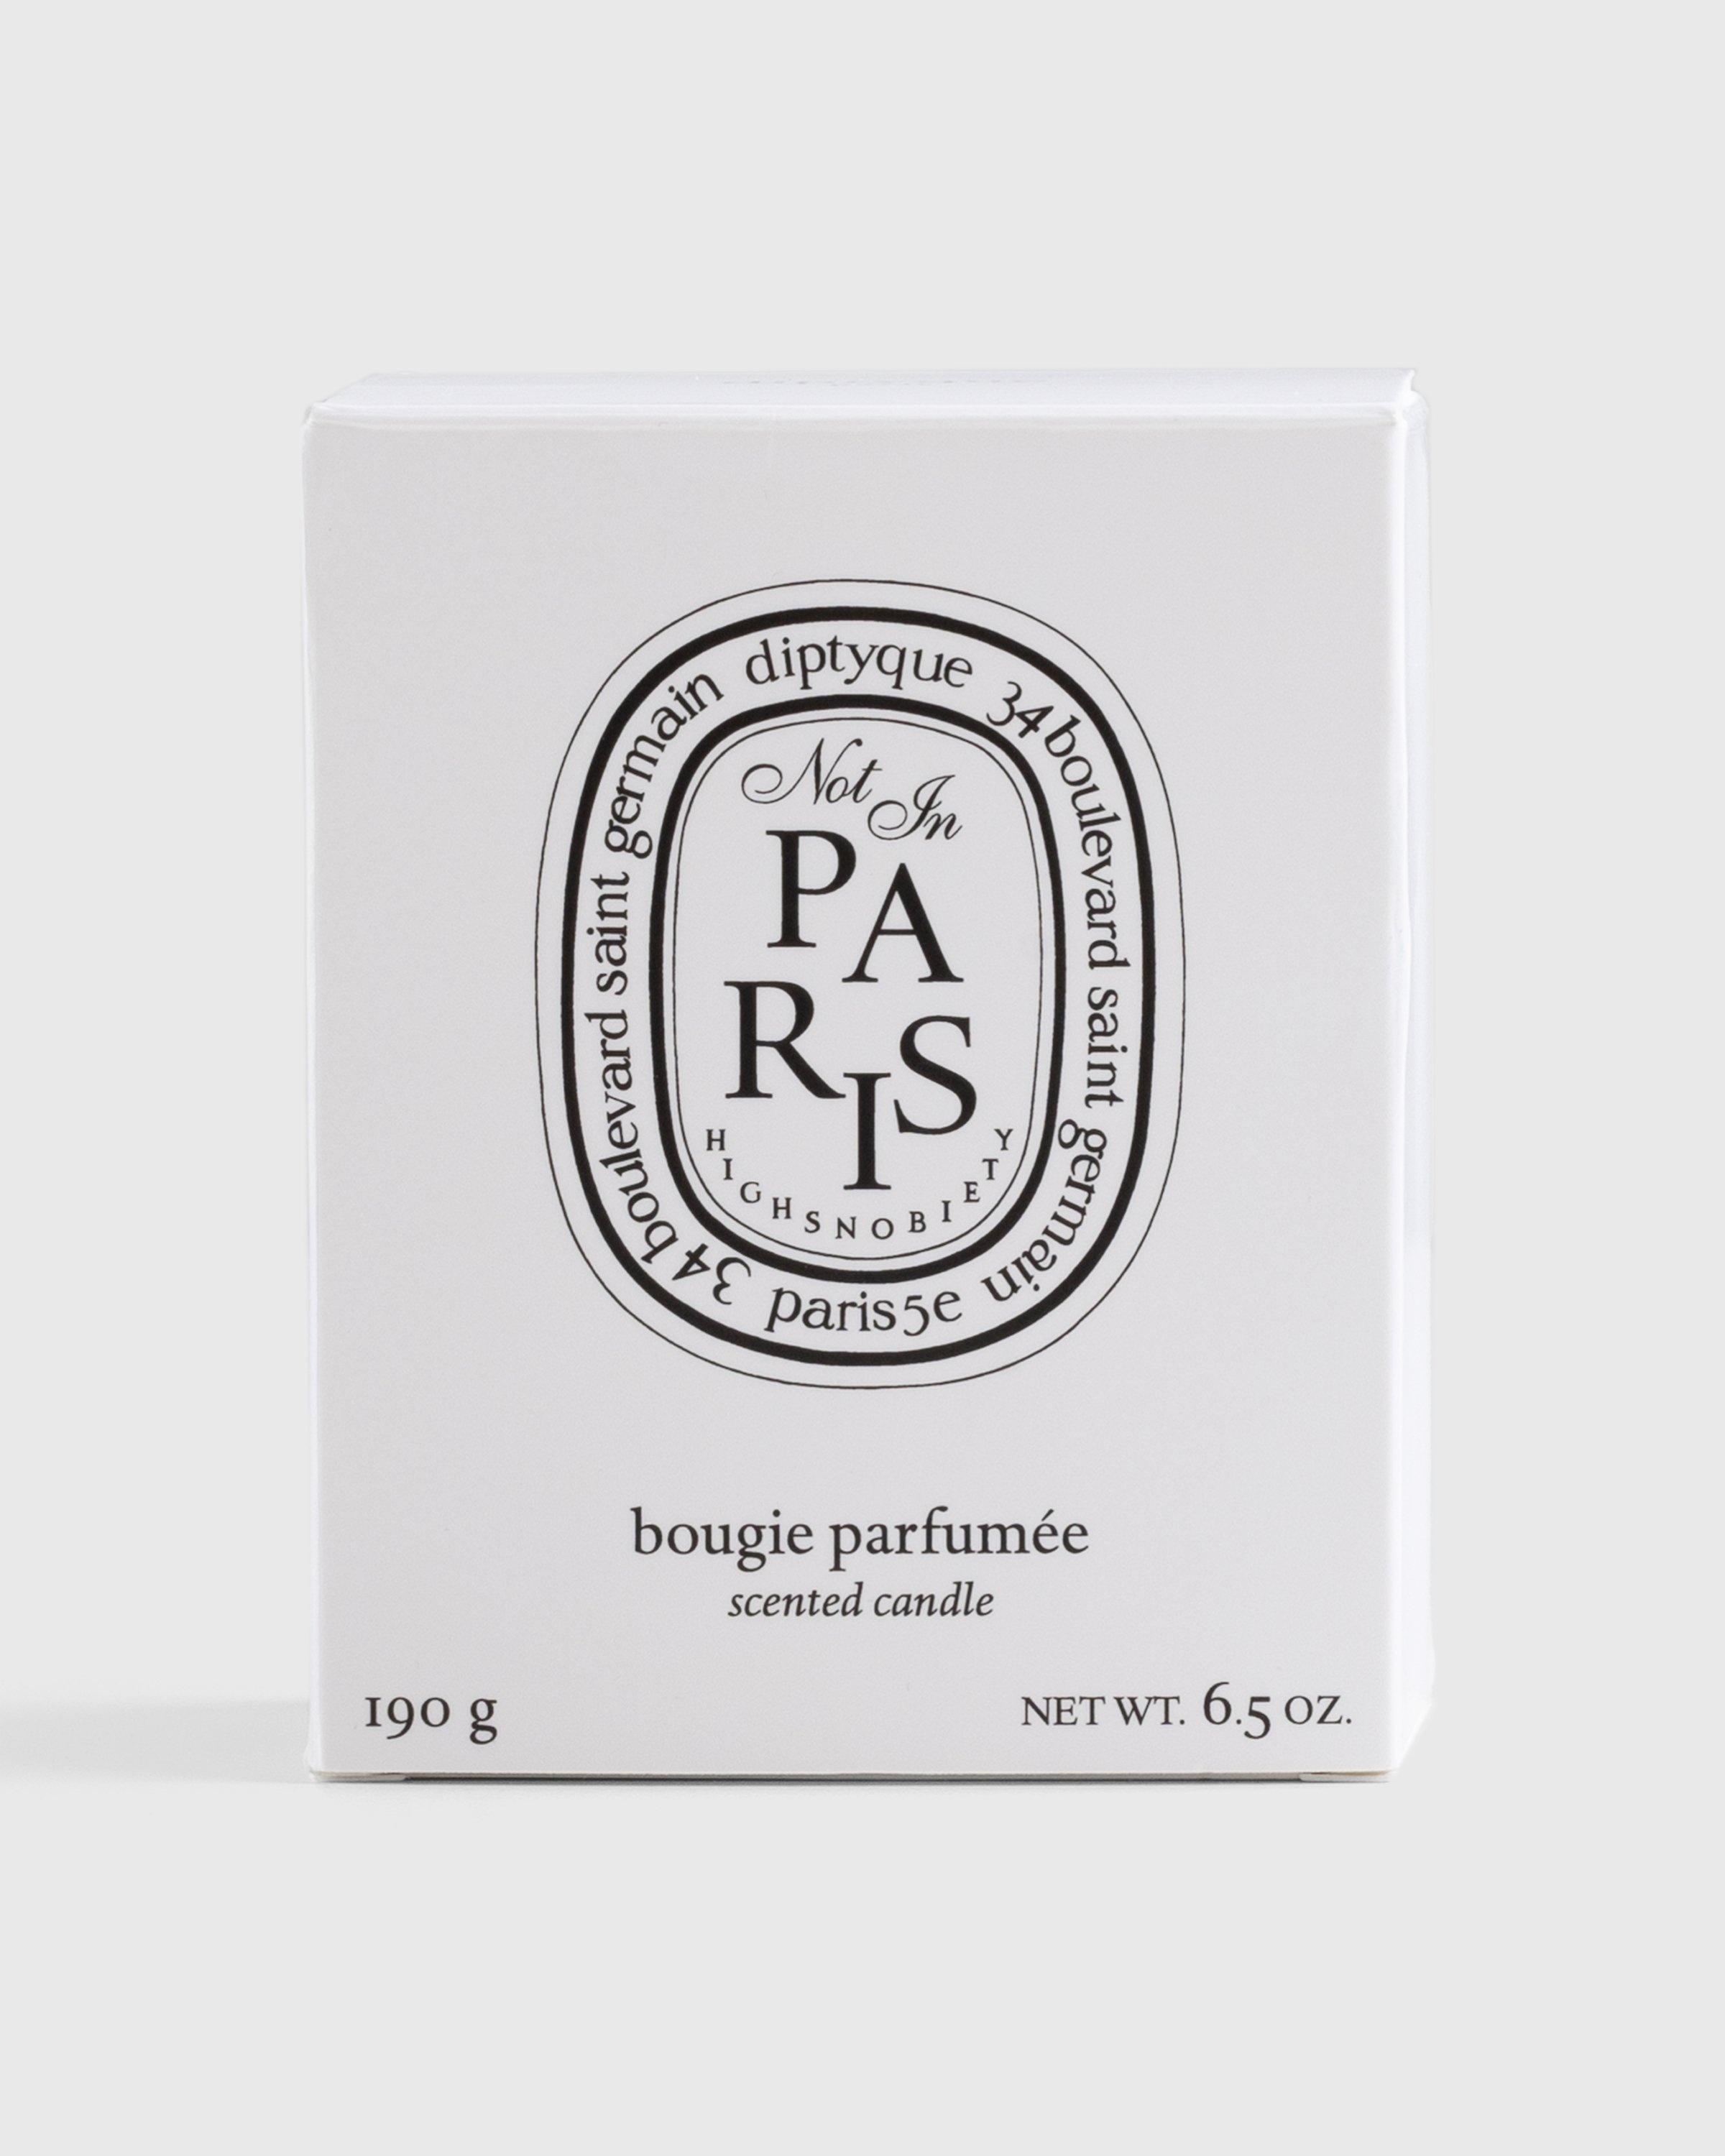 Diptyque x Highsnobiety – Not In Paris 4 Scented Candle White - Candles - White - Image 3